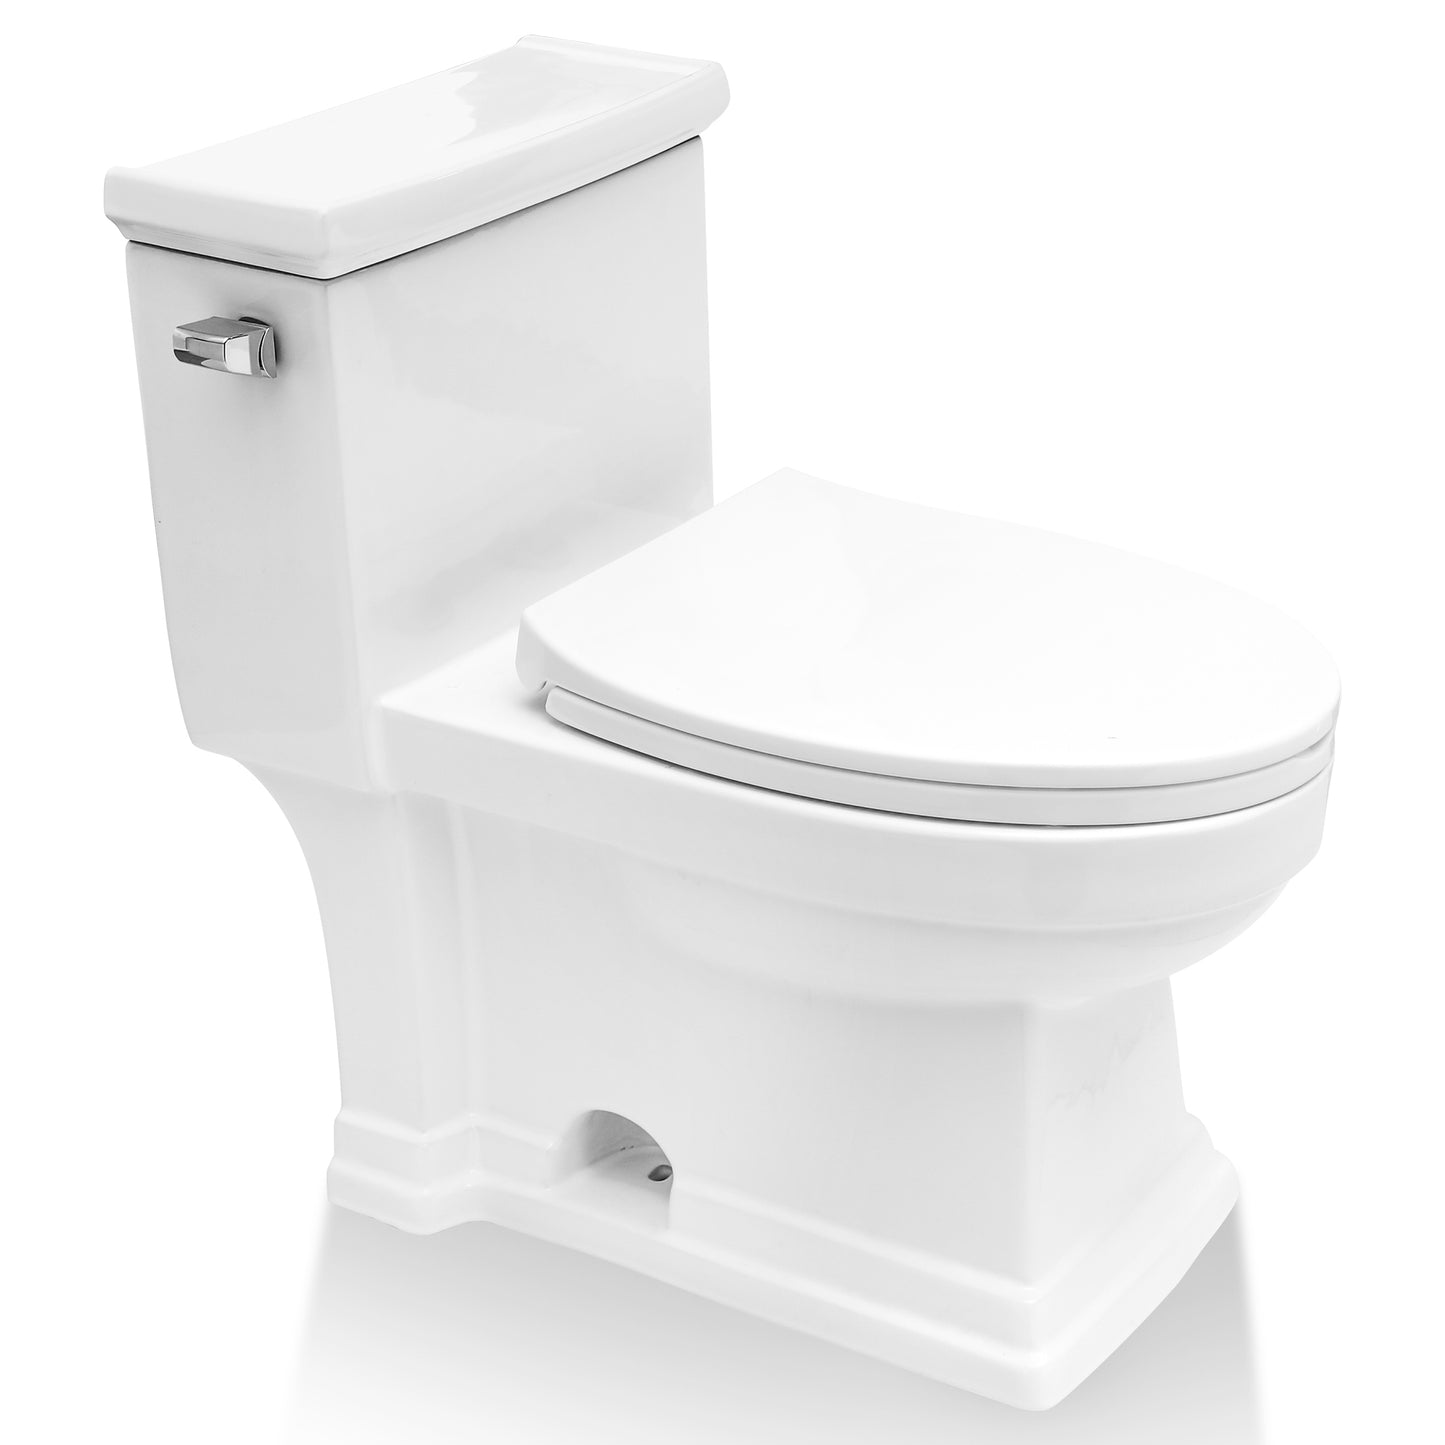 One Piece Toilet - Lordear Elongated Tall Comfort Height Single Flush White Ceramic Bathroom Toilet with Soft Clsoing Seat, Skirted Concealed Trapway, 12" Rough In, Wax Ring Included